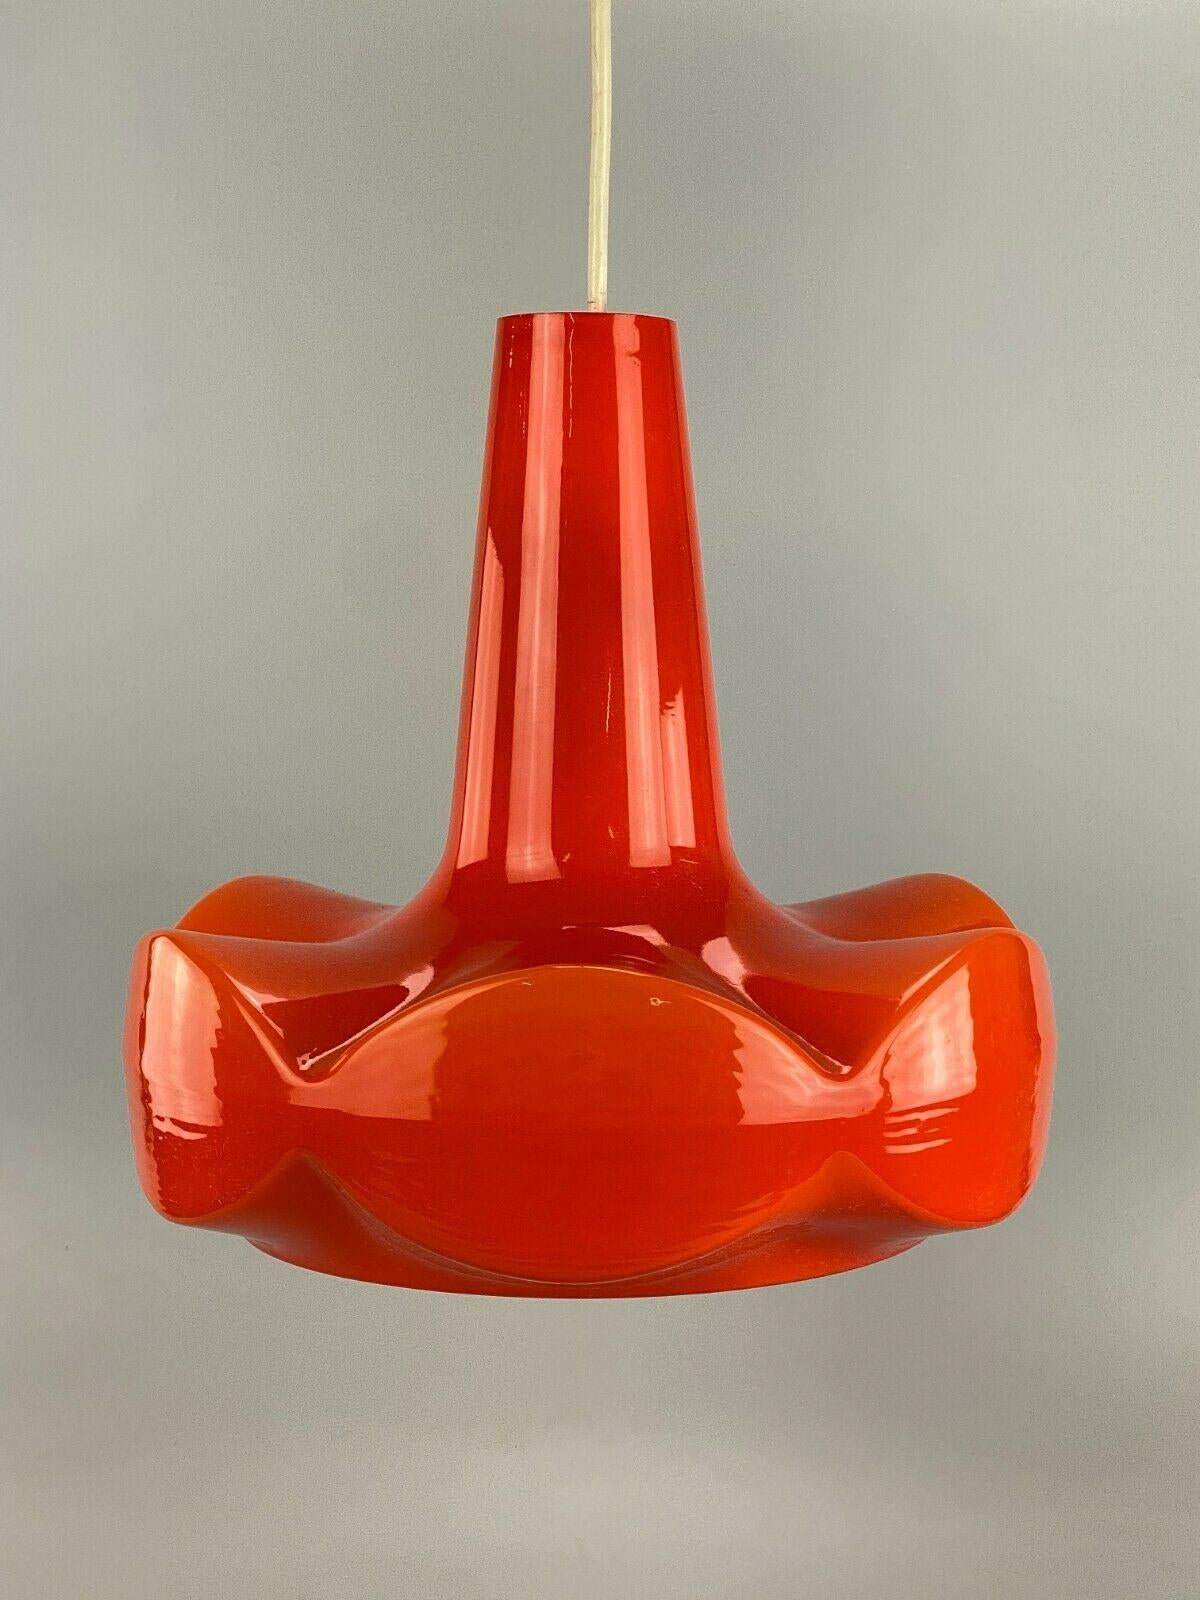 60s 70s Peill & Putzler hanging lamp ceiling lamp glass space design lamp

Object: lamp

Manufacturer: Peill & Putzler

Condition: good

Age: around 1960-1970

Dimensions:

Diameter = 28cm
Height = 29cm

Other notes:

The pictures